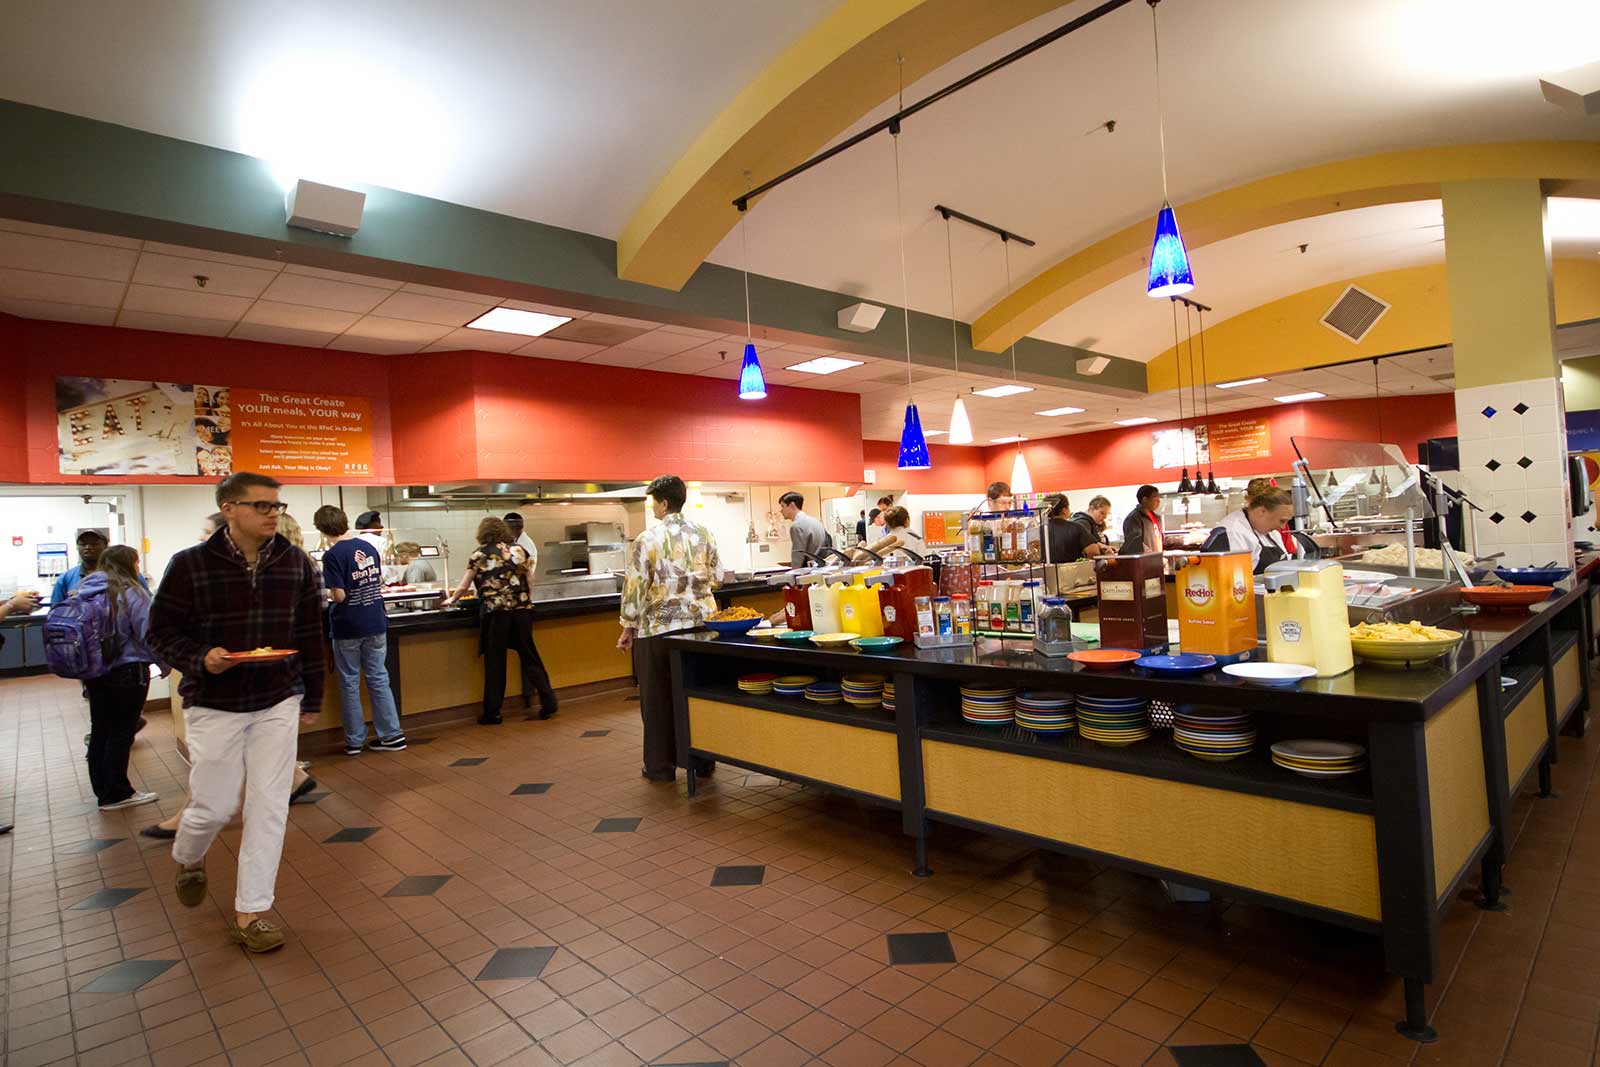 Dorrill Dining Hall, located in the heart of campus, features more than 12,000 unique recipes and menus that integrate healthy choices, global flavors and a host of other options.